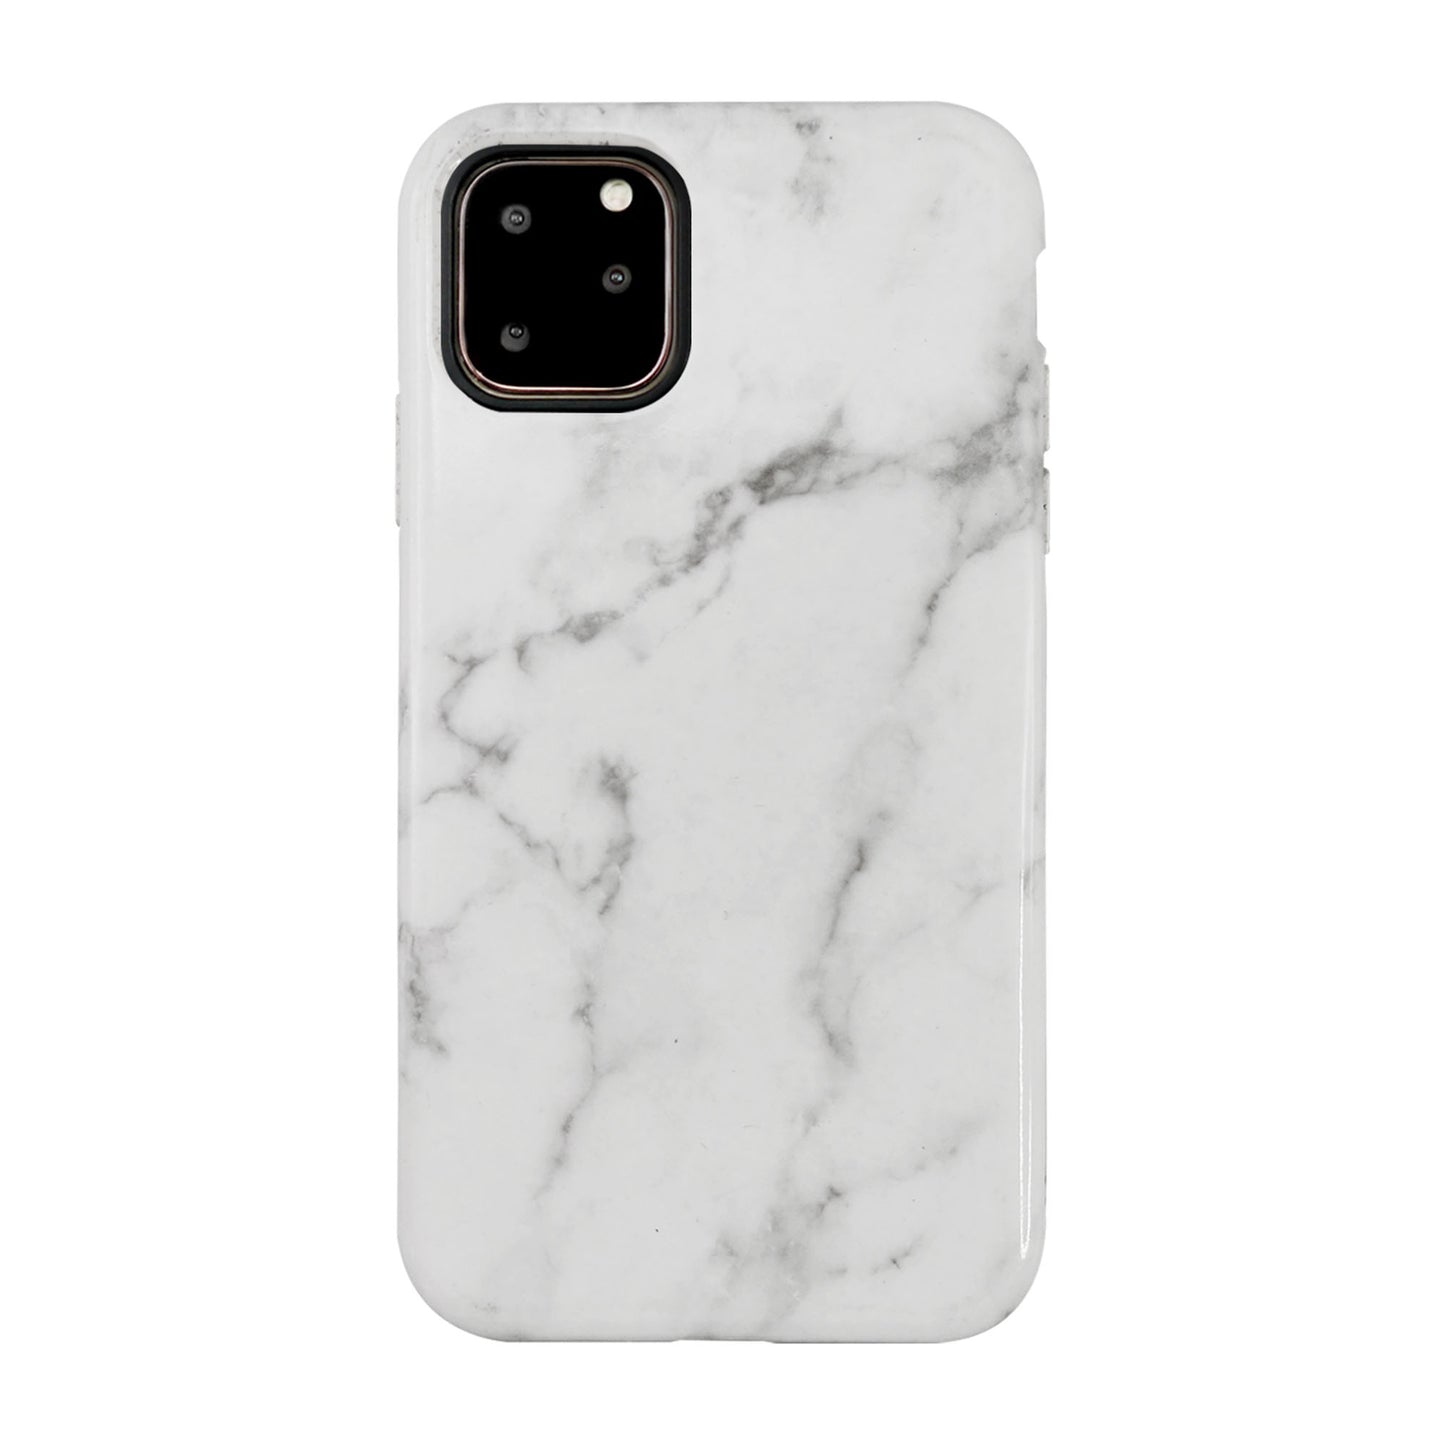 iPhone 11 Pro Uunique White/Gold (White Marble) Nutrisiti Eco Printed Marble Back Case - 15-05036